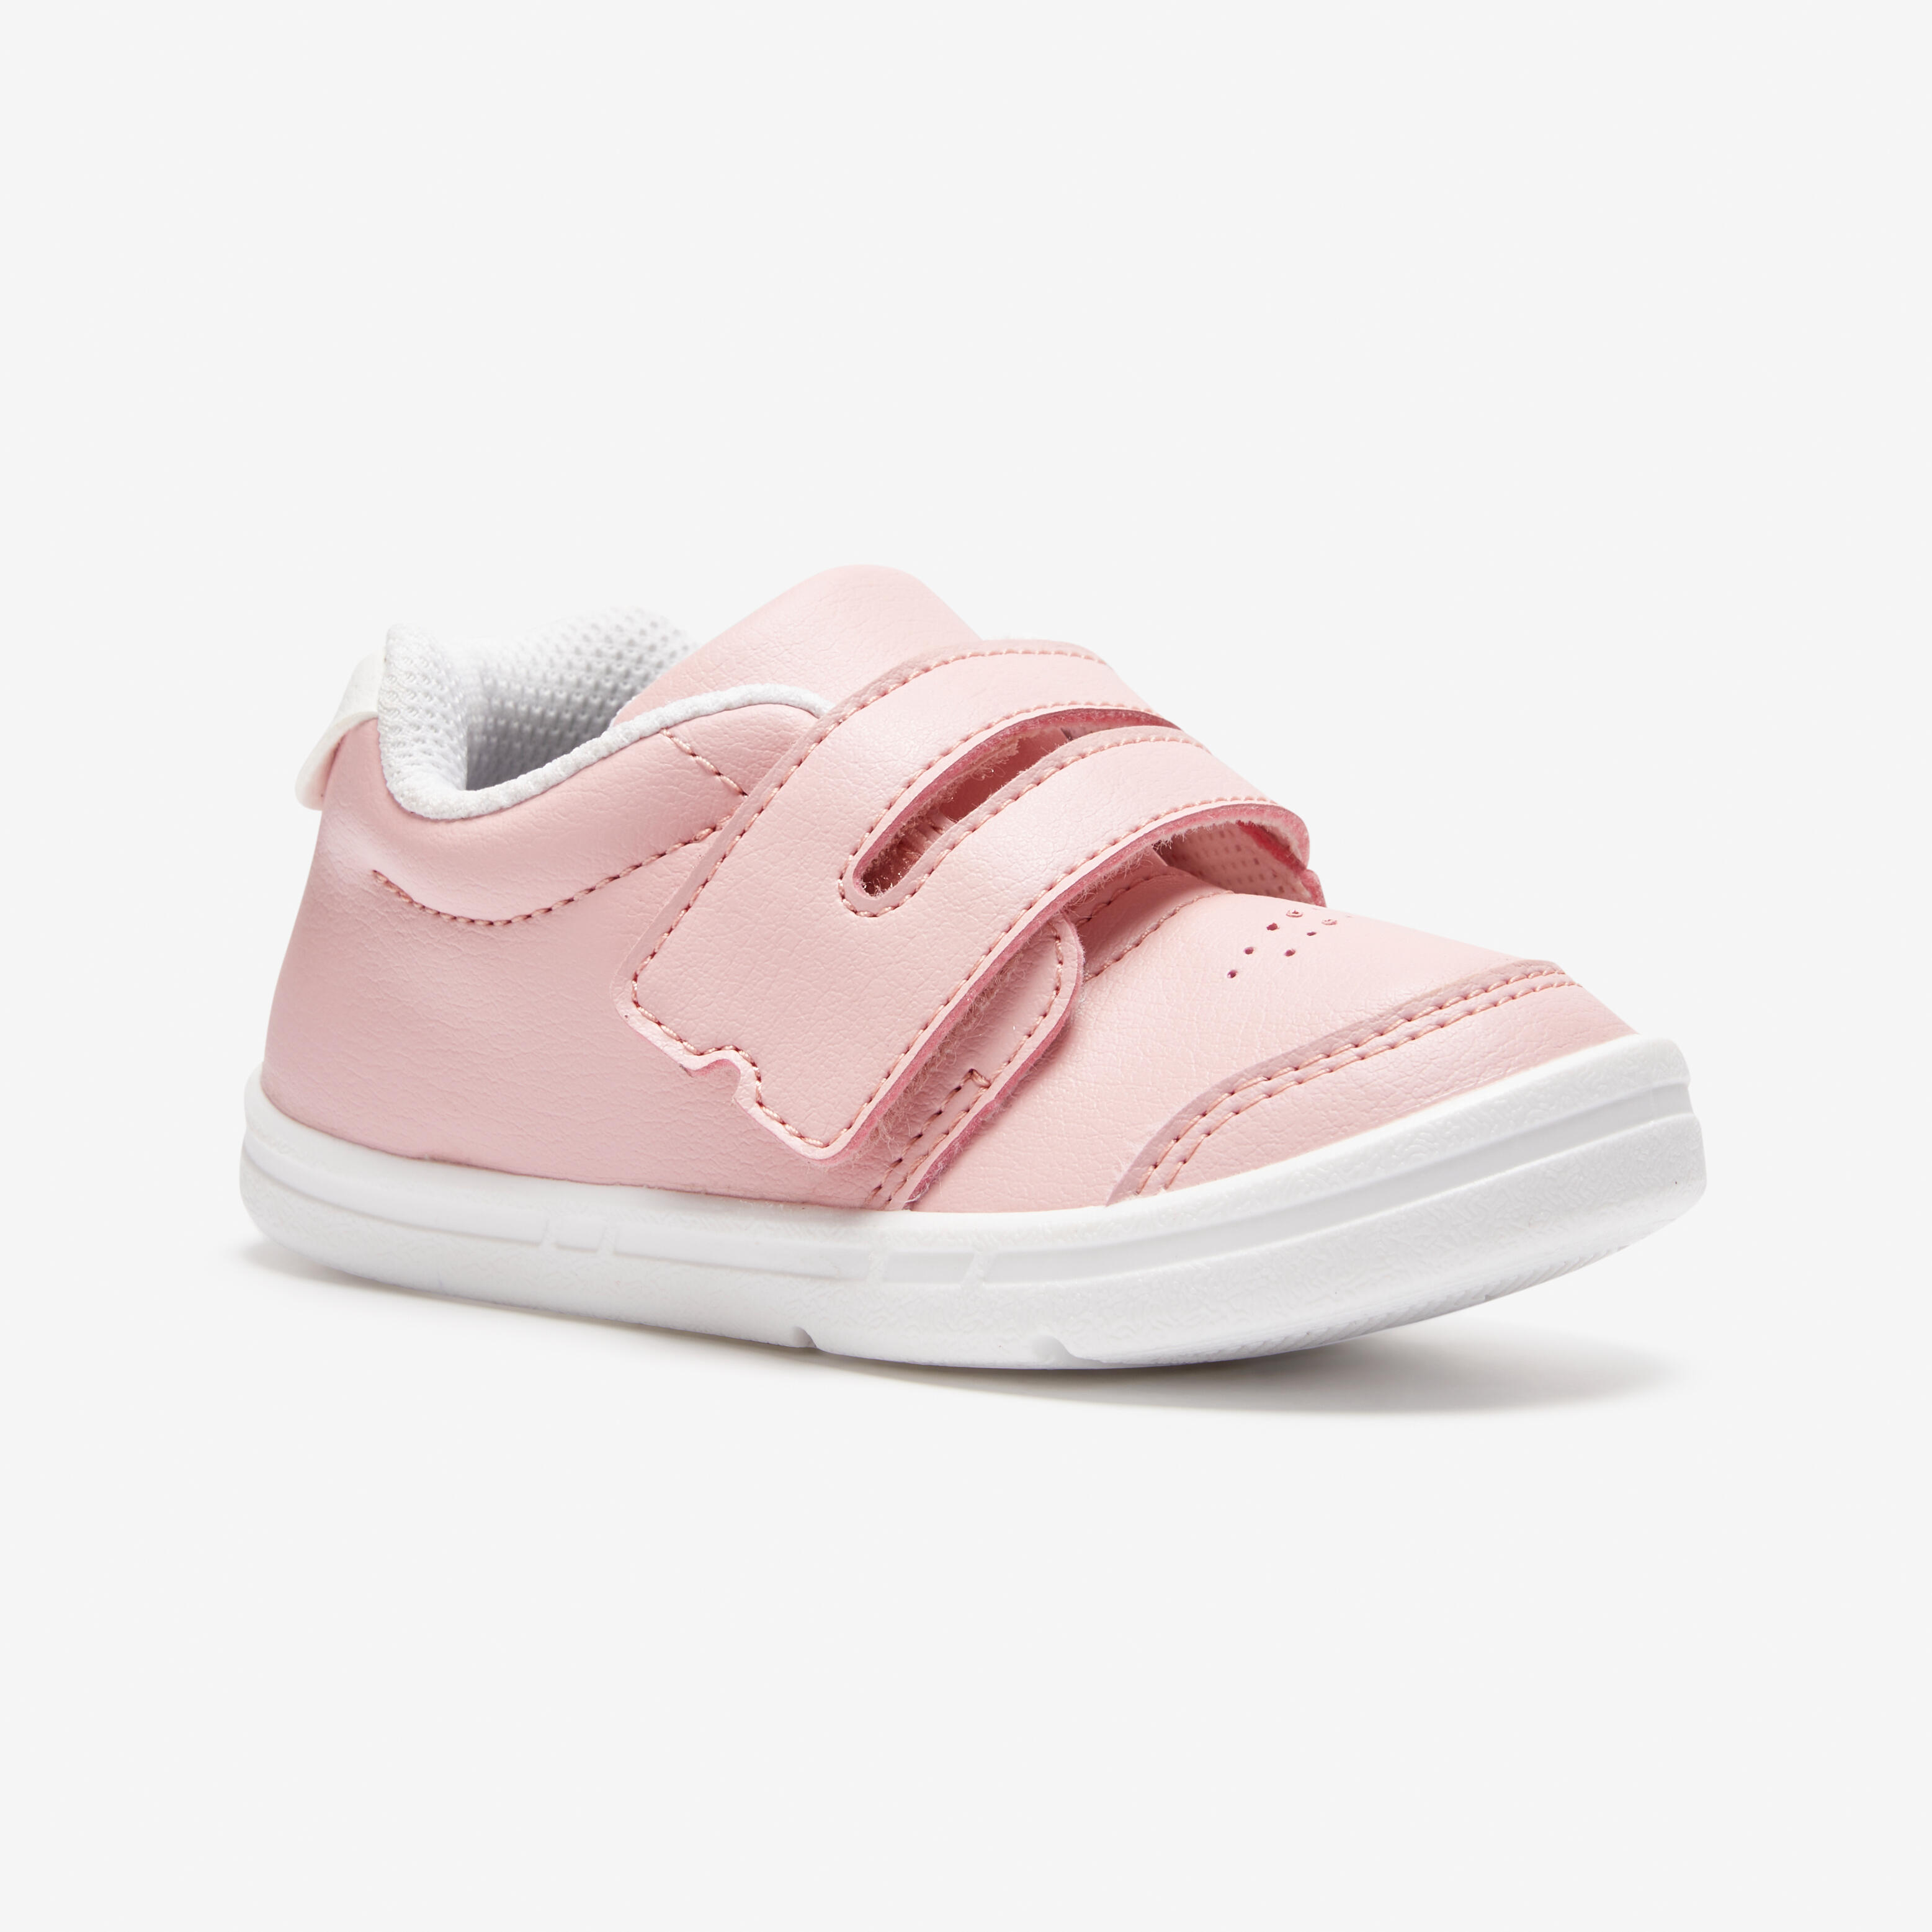 Chaussures premiers pas enfant – I Learn 100 rose - DOMYOS